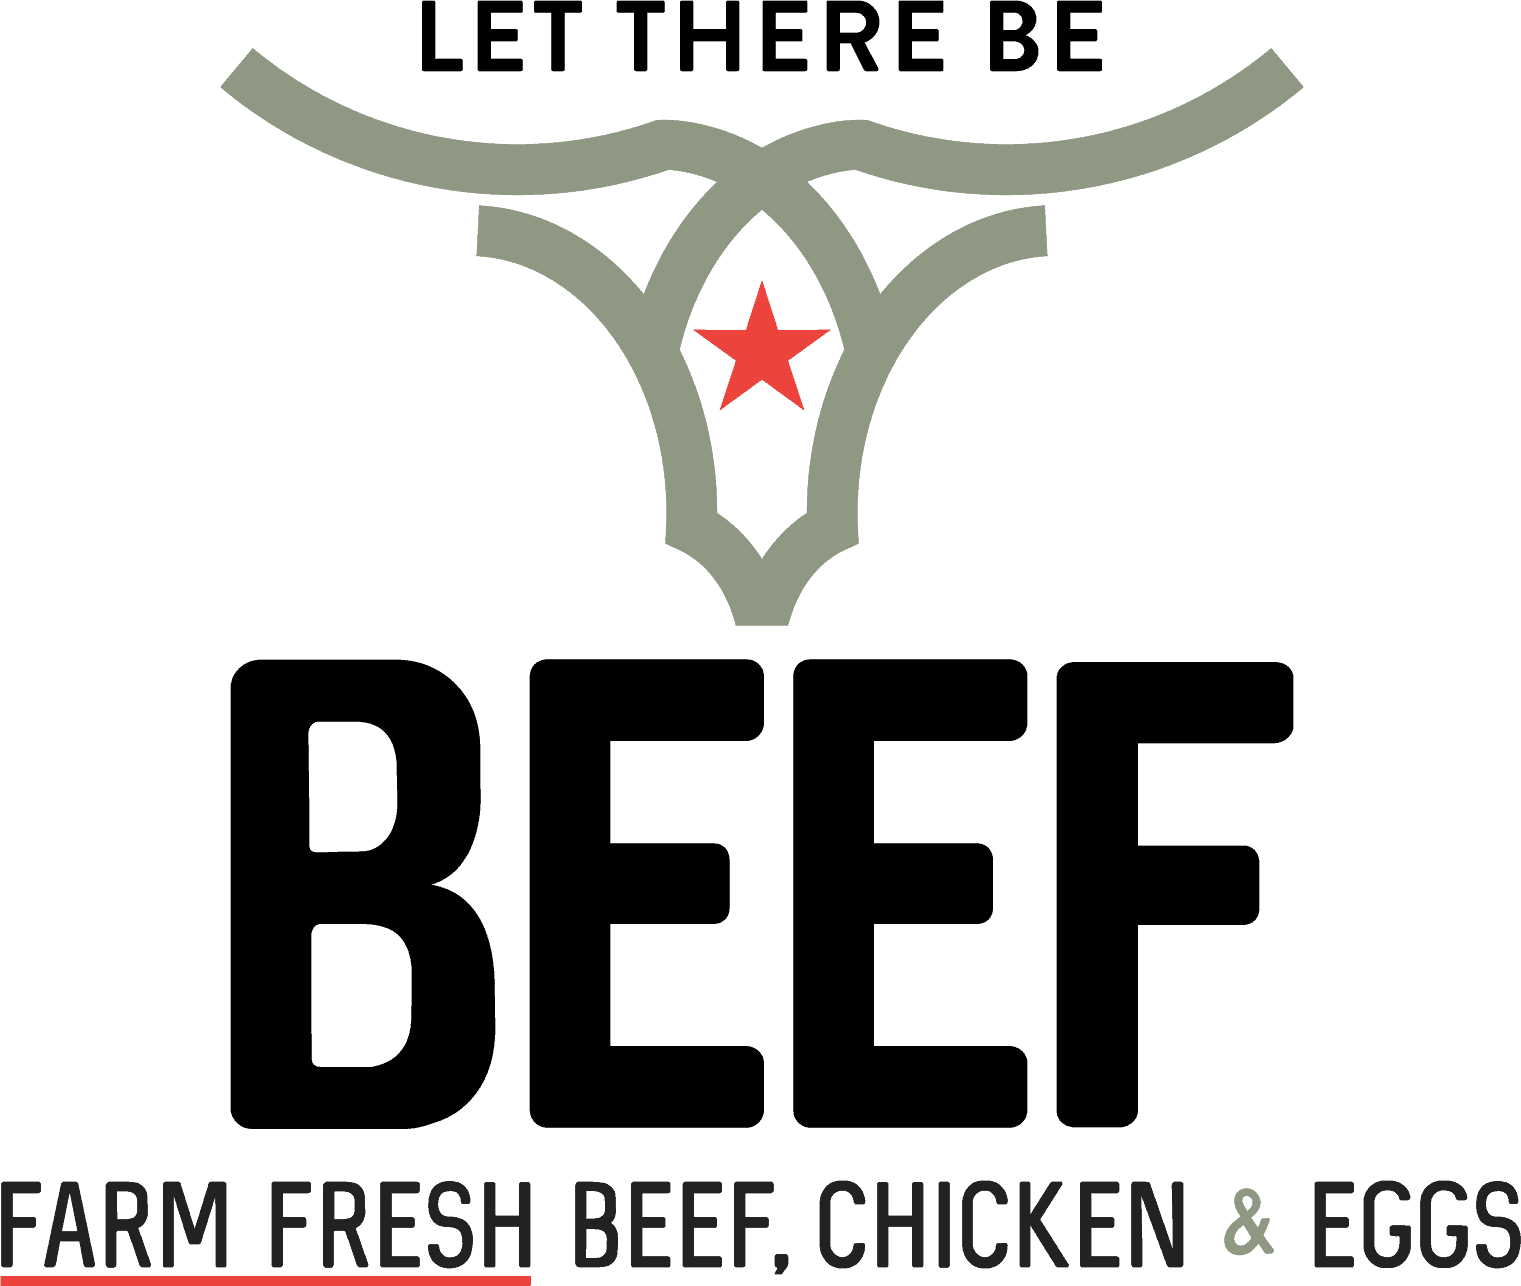 Let there be Beef